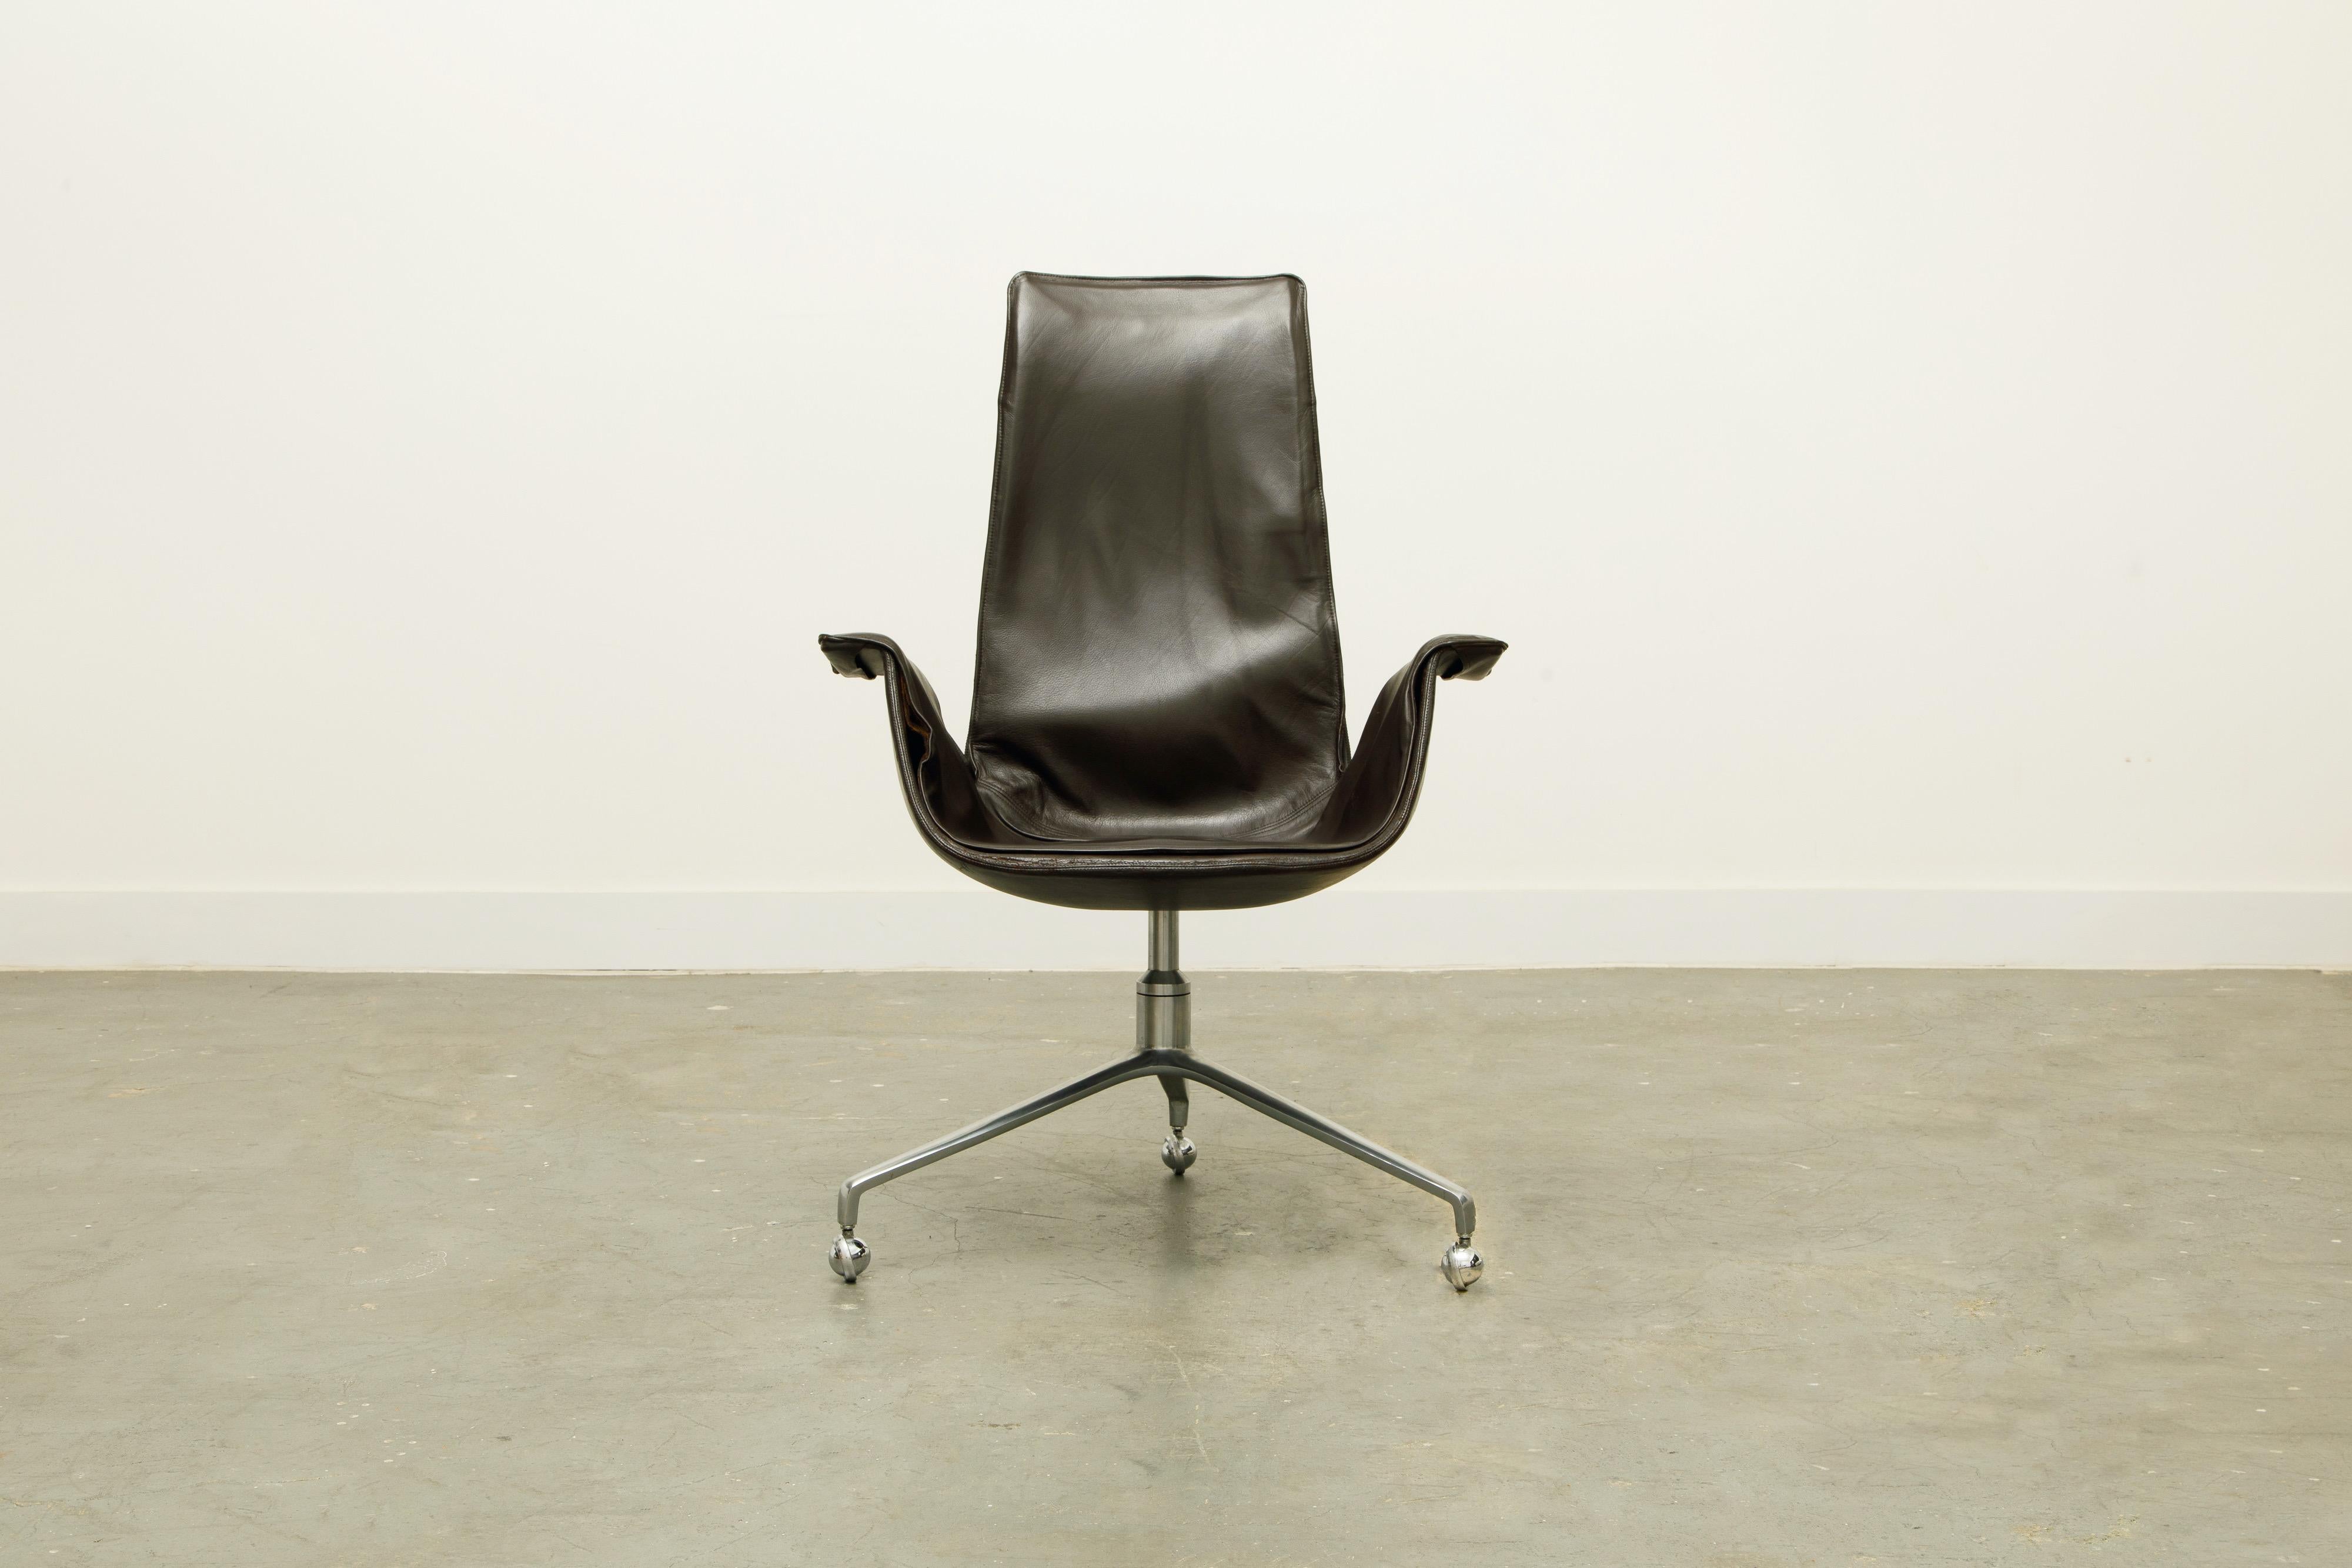 High back (executive) version of the Model FK 6725, leather 'Bird' chair, also commonly referred to as the 'Tulip' chair, designed by Preben Fabricius and Jørgen Kastholm, manufactured in Germany by Alfred Kill International during the 1960s.